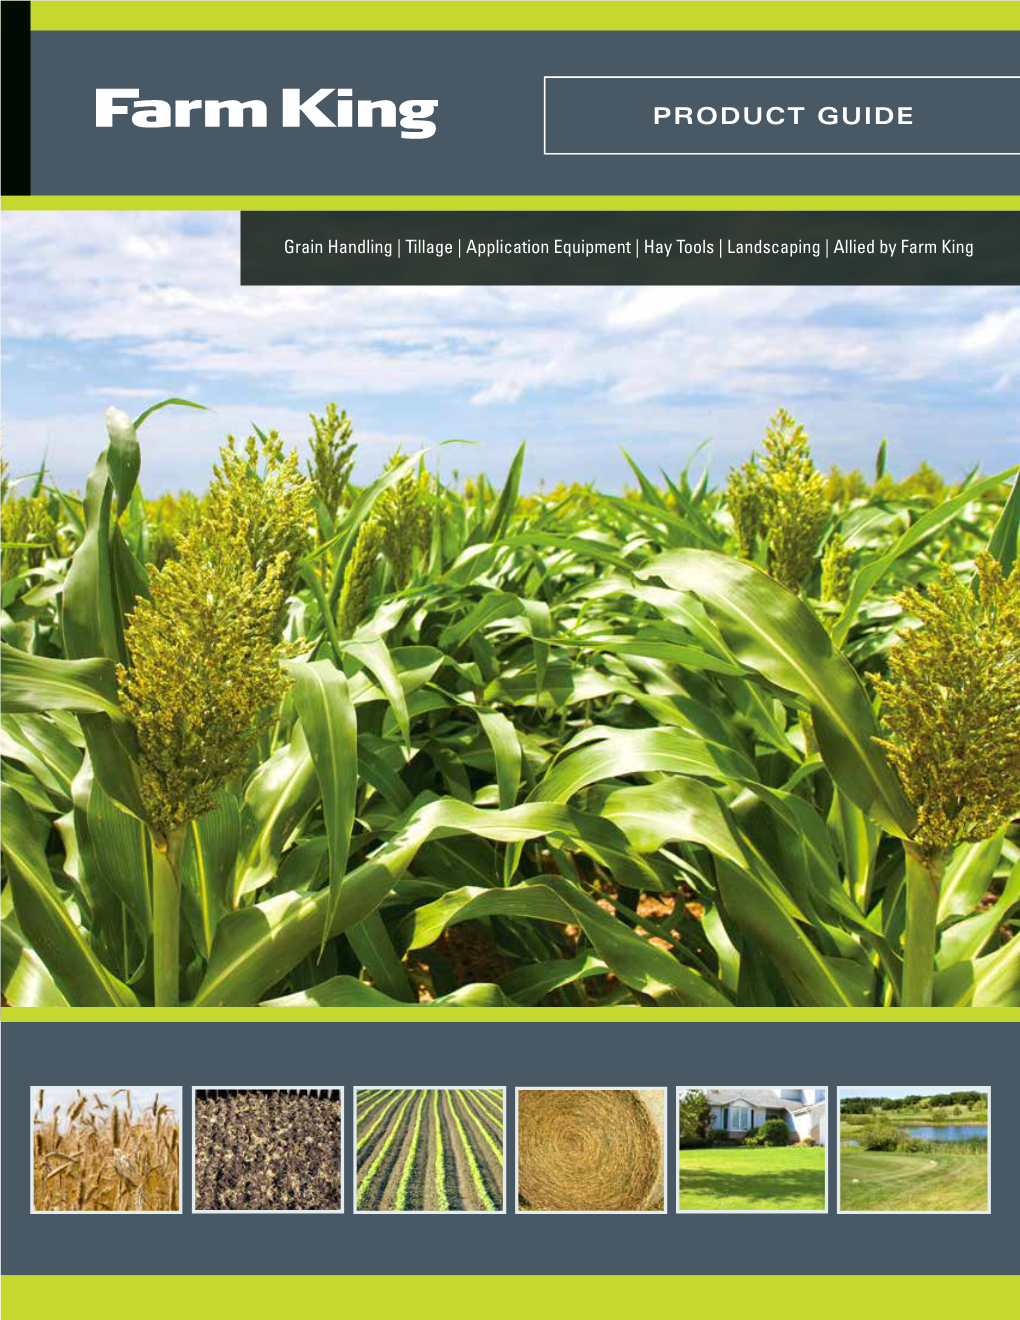 Download the Complete Farm King Product Guide